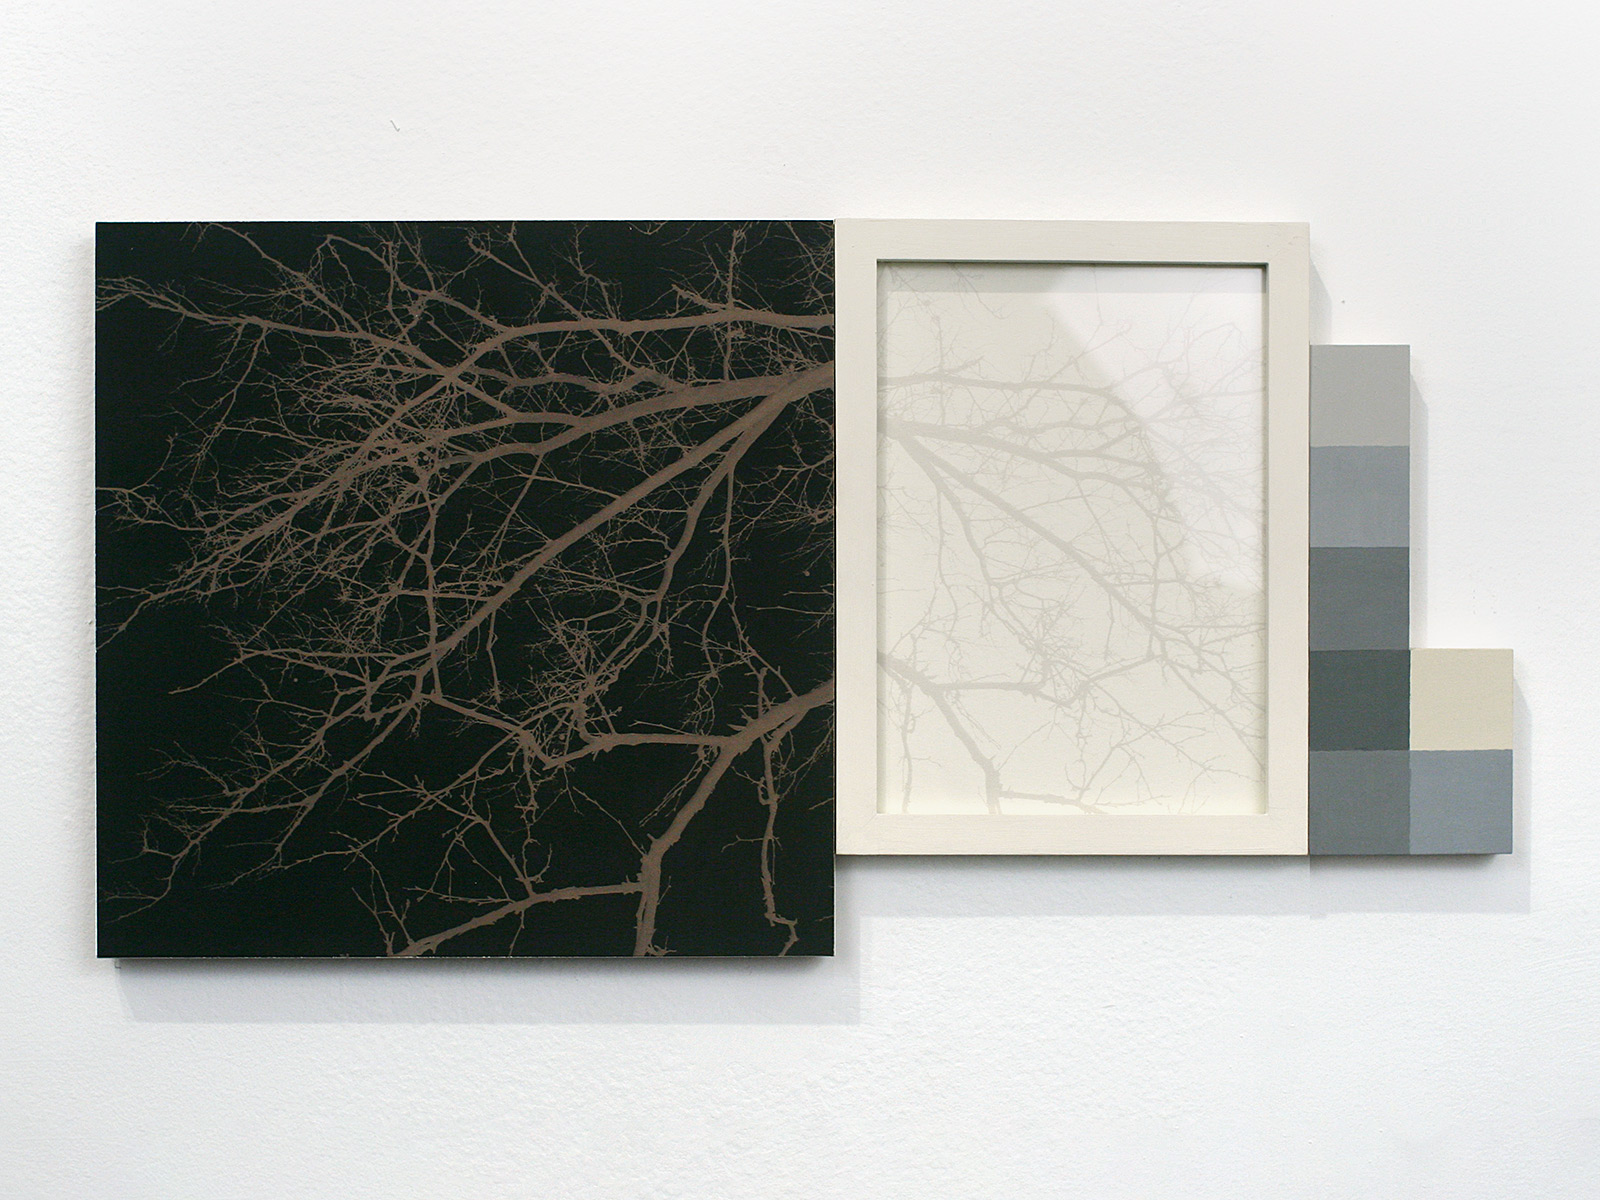 Square Root 1. Flashe, gouache, archival pigment prints, frame, wood. 2014.